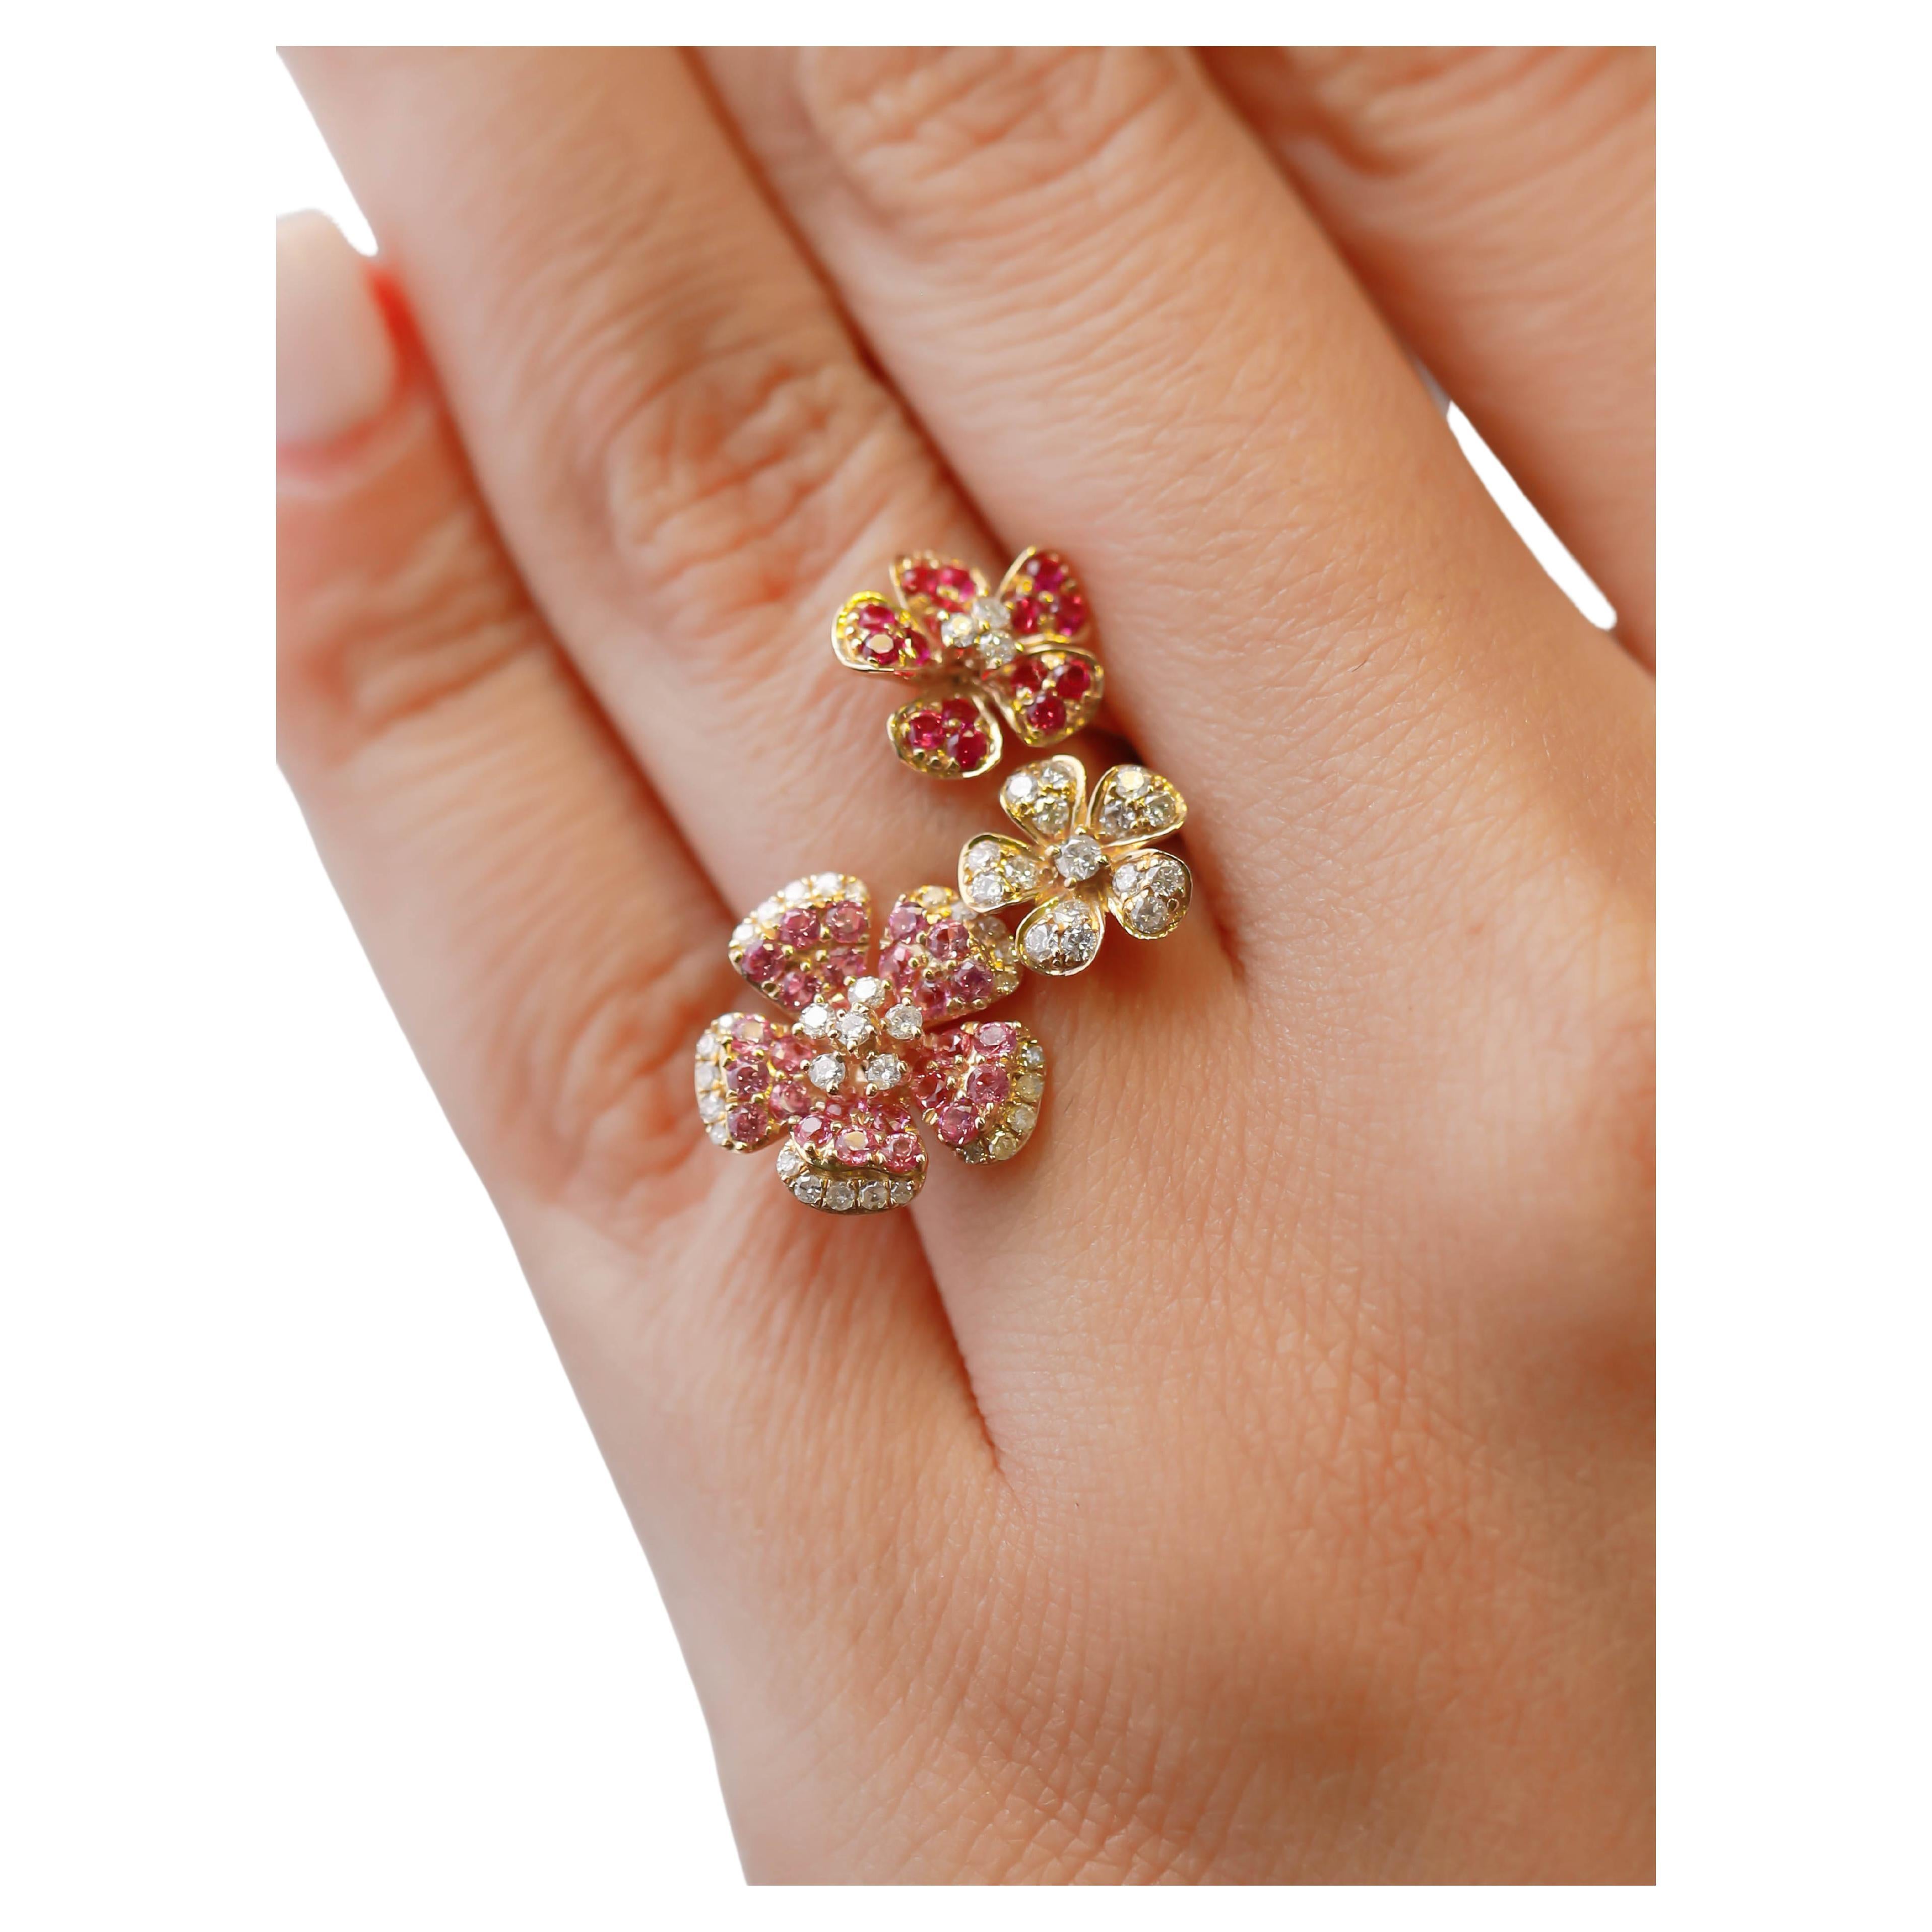 14K Yellow Gold Three Daisy Flower Floral Ring 1.08Ct Pink Sapphire Pave Diamond For Sale